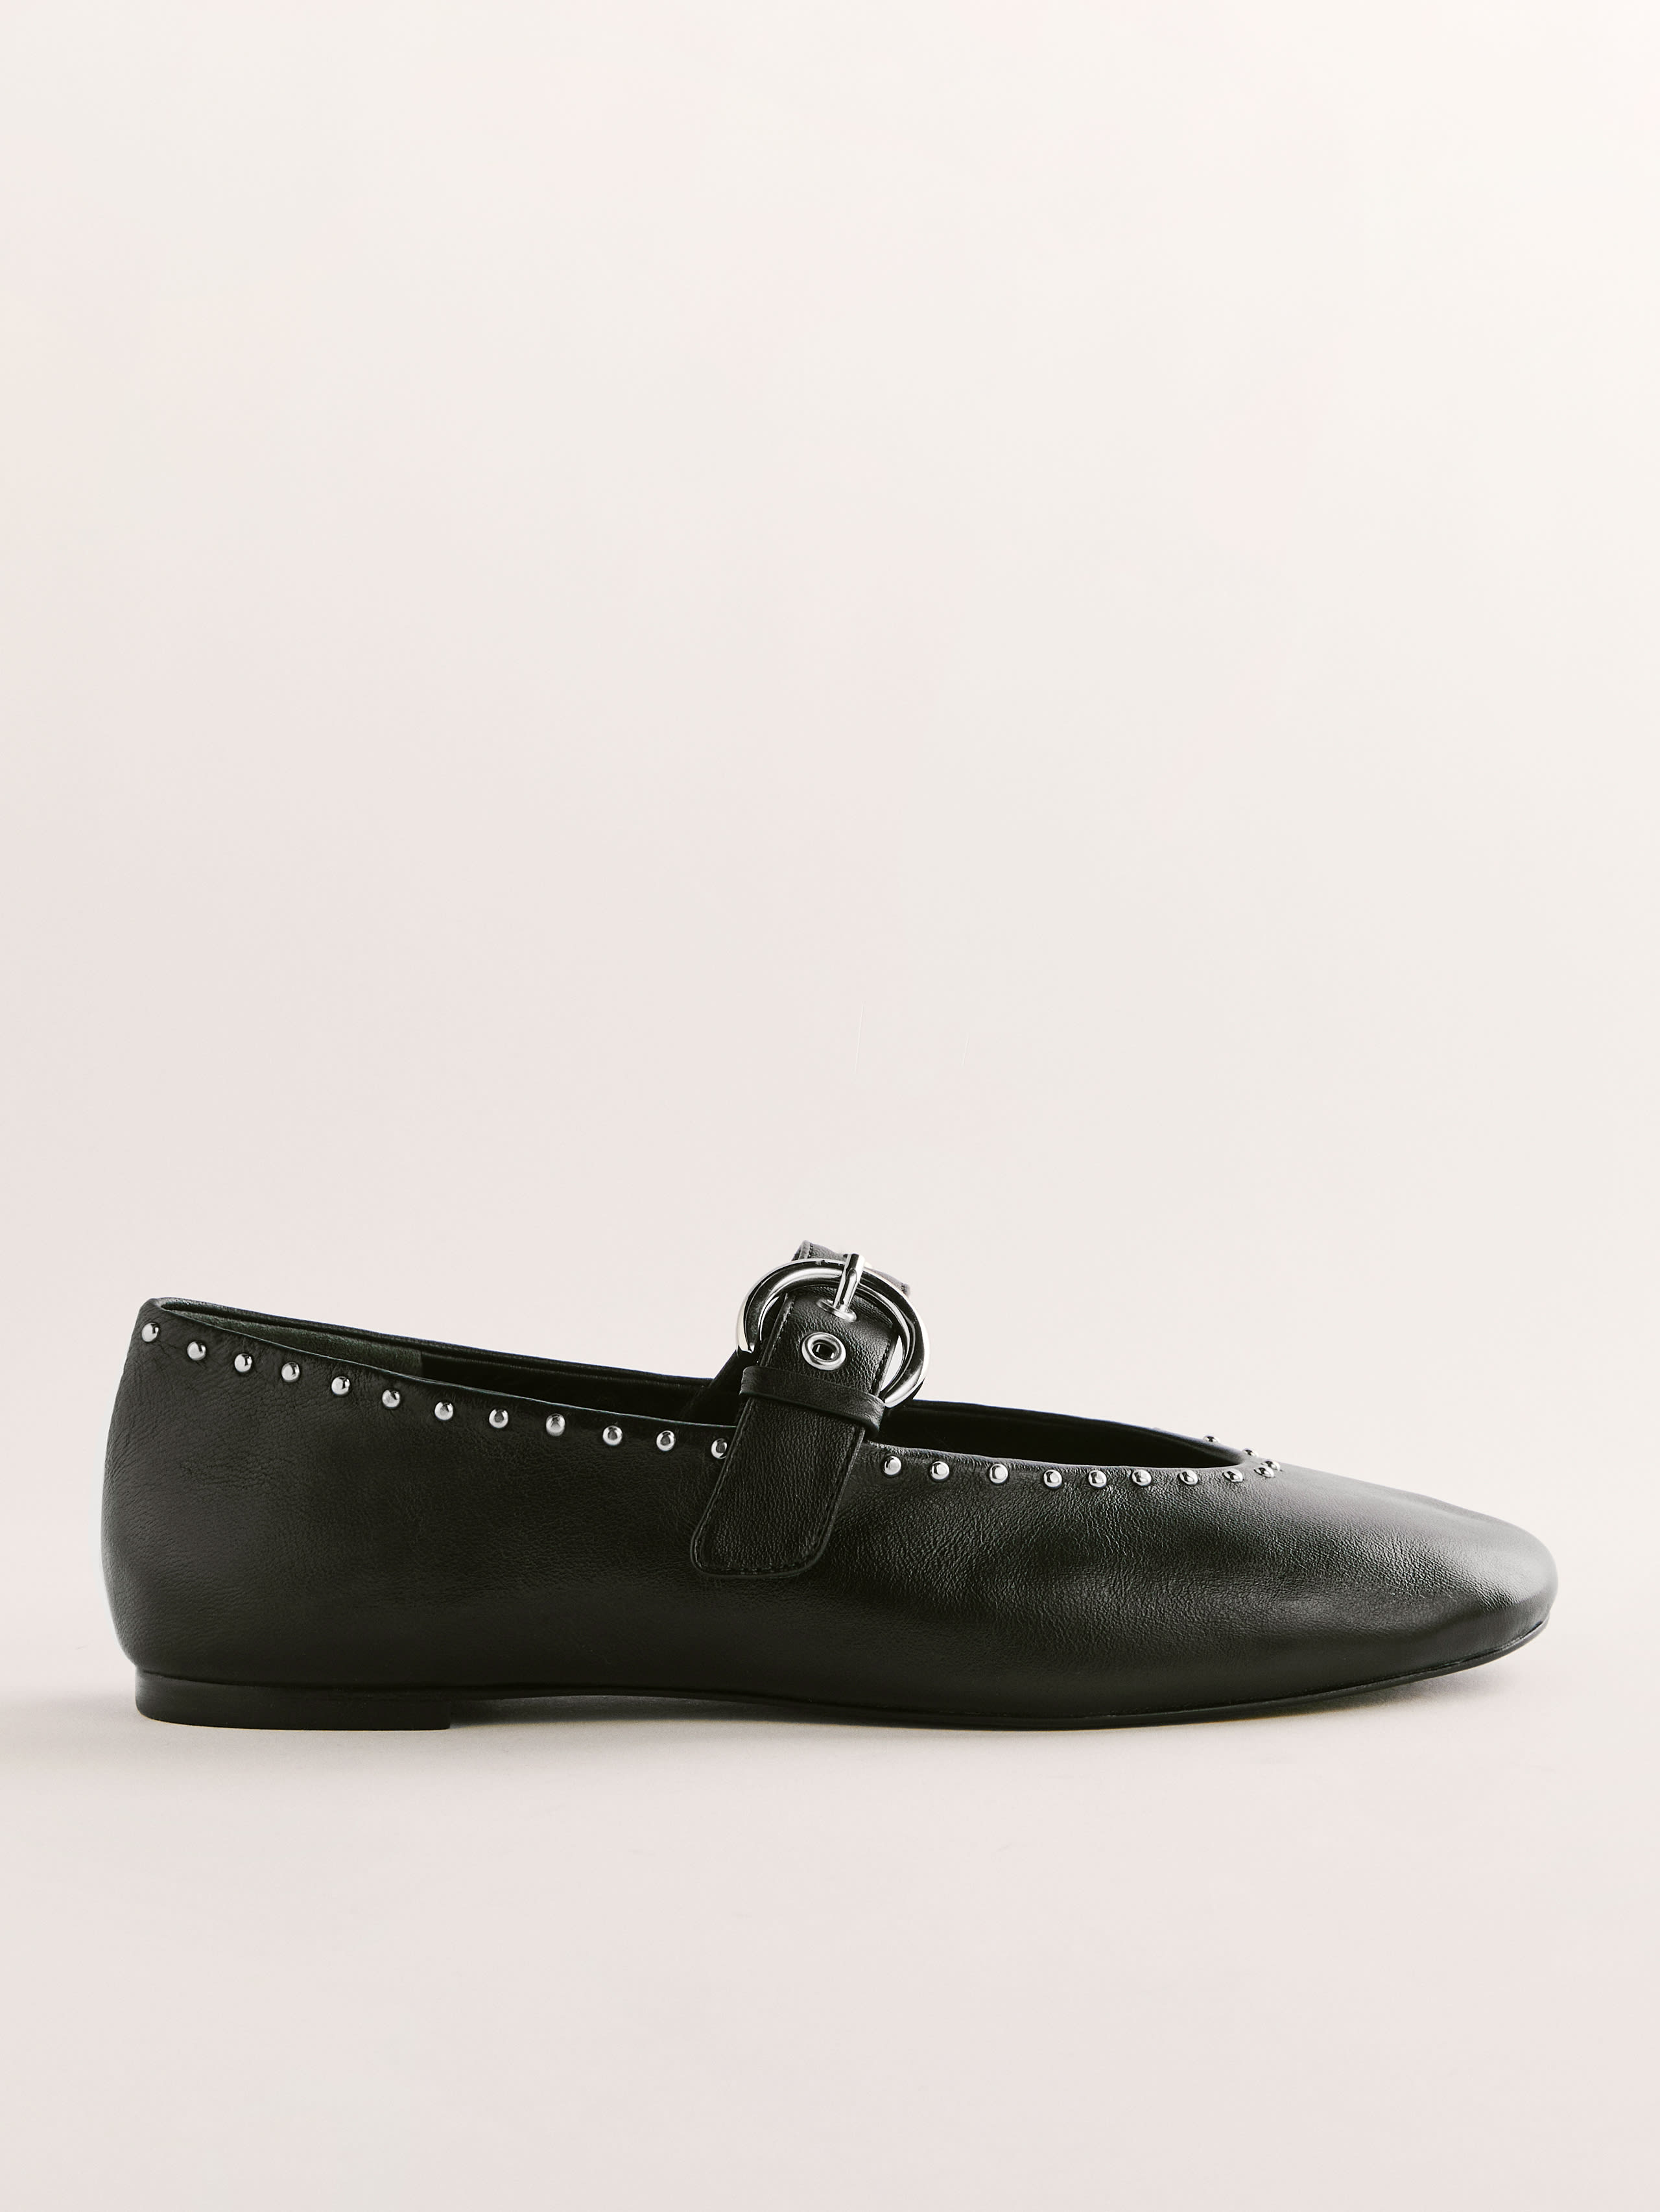 Reformation Bethany Ballet Flat In Black W/ Studs